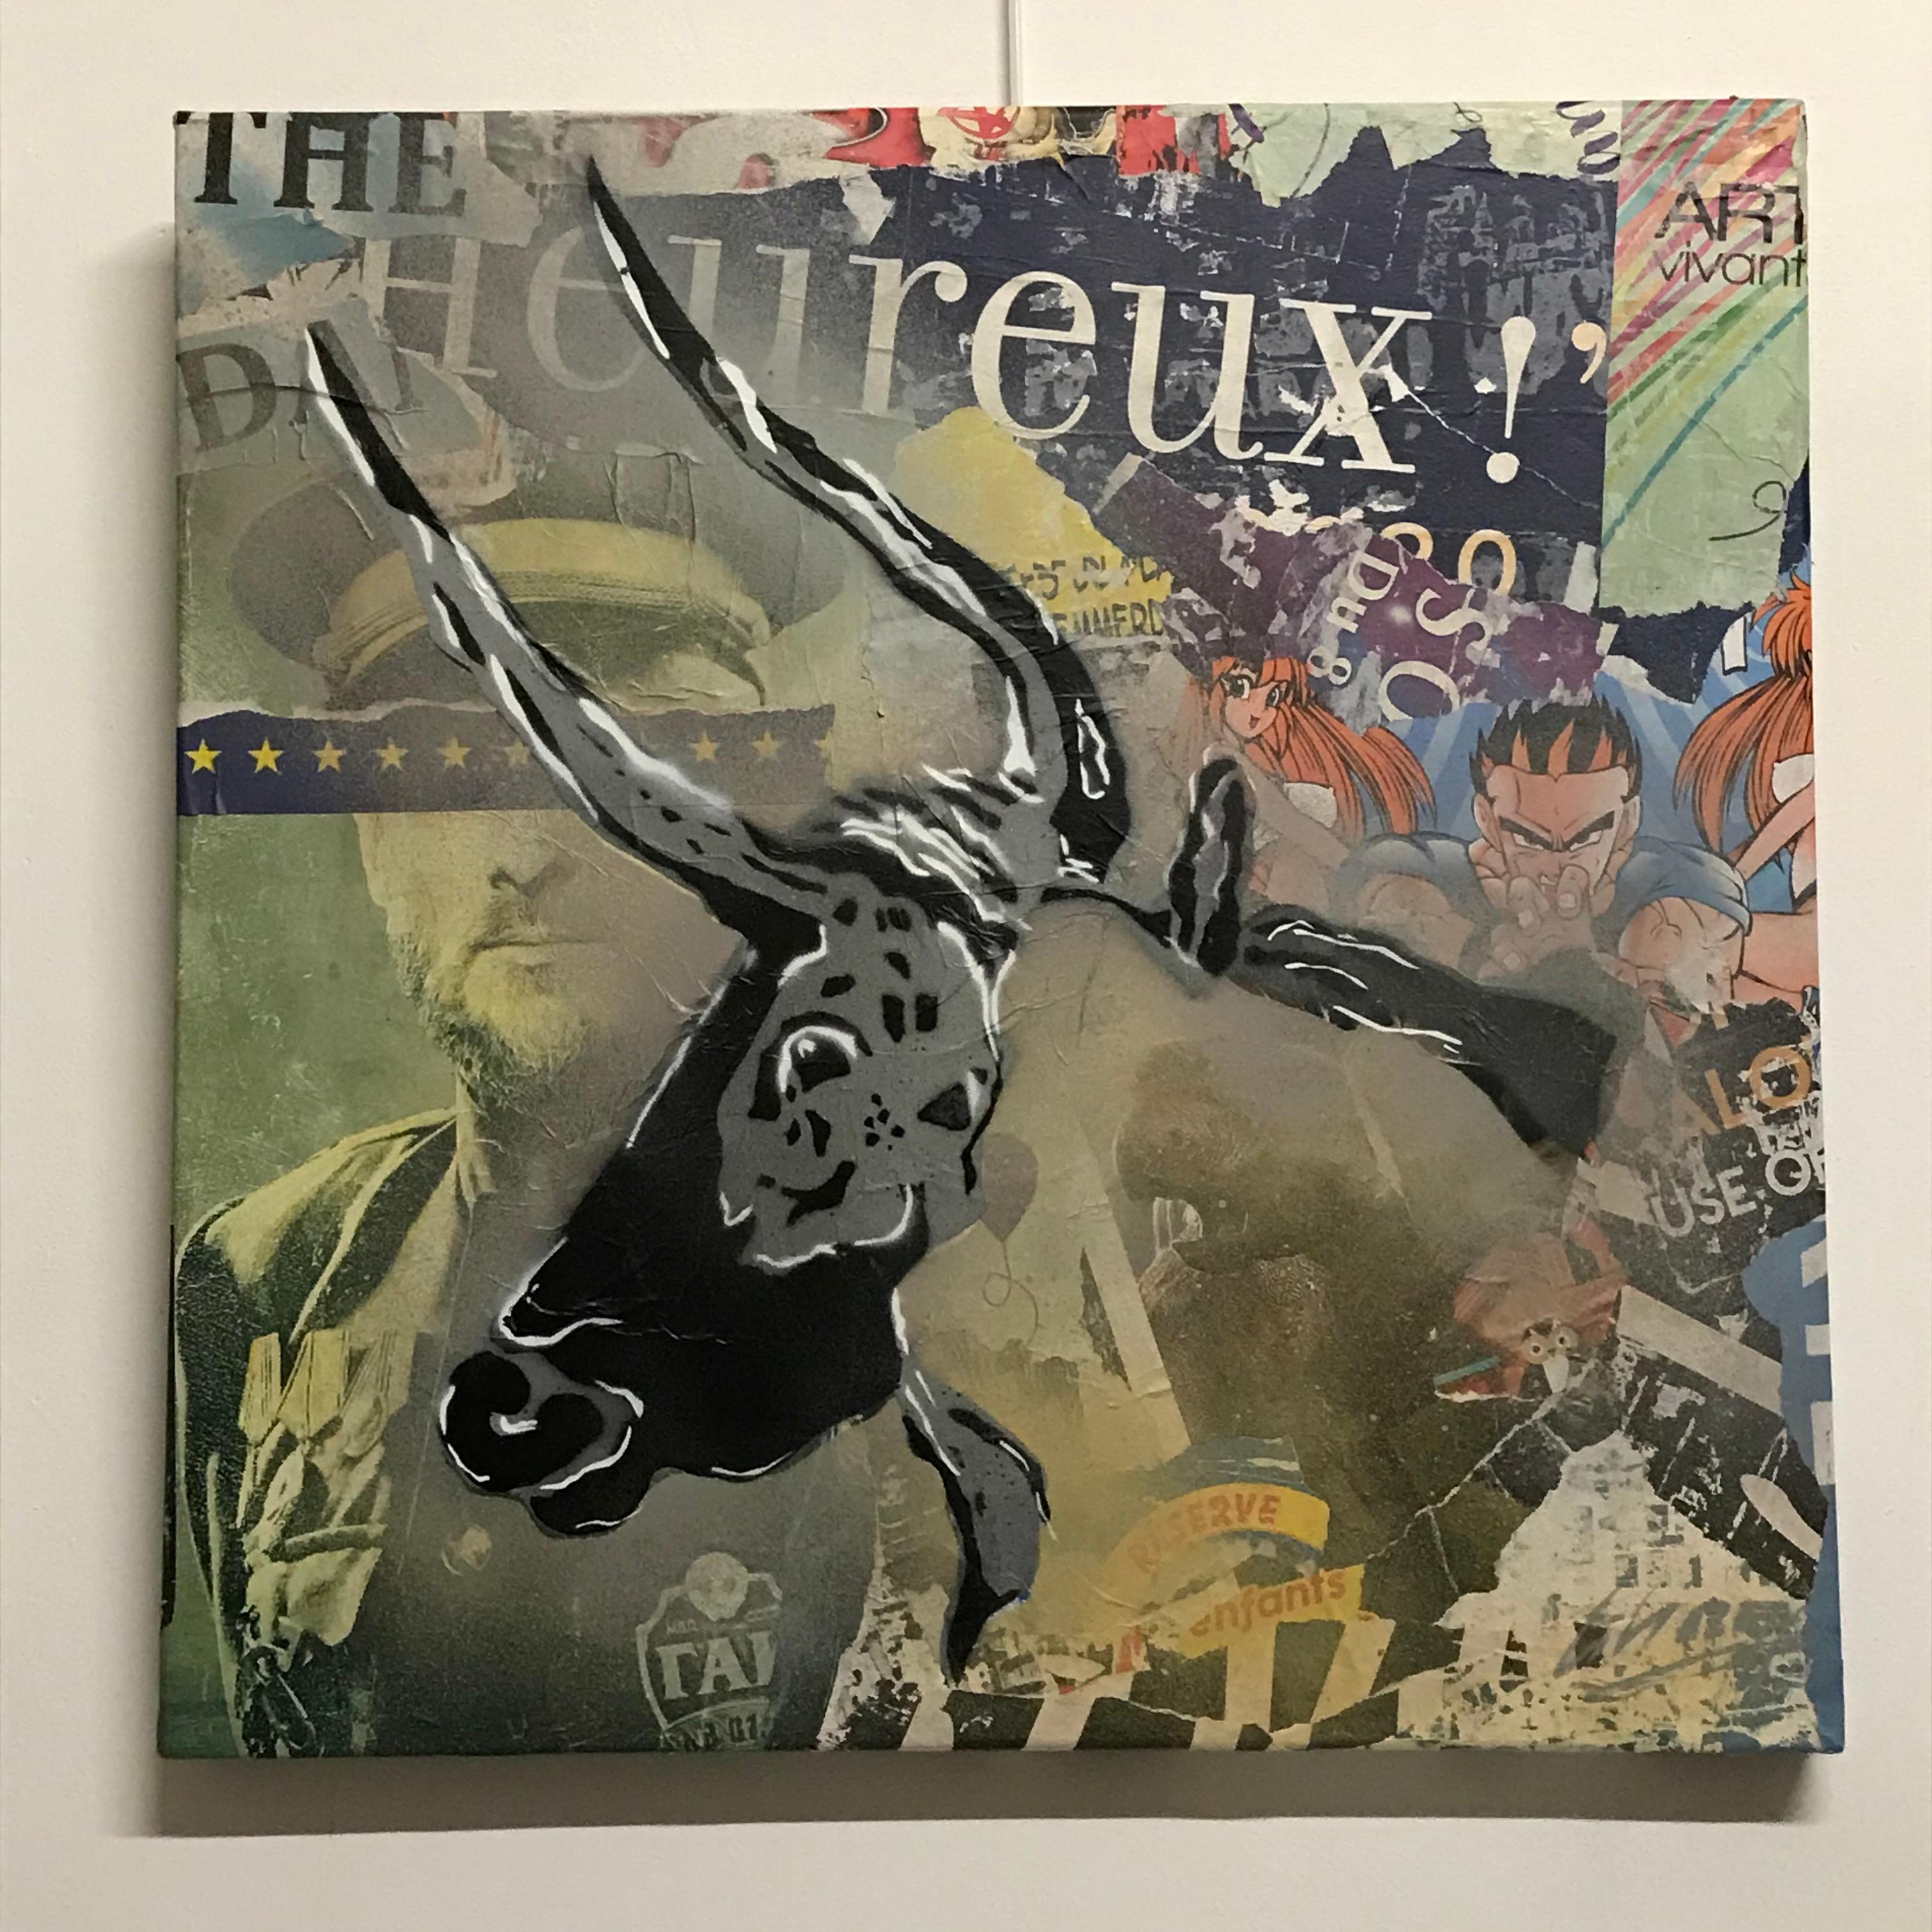 Christophe Stouvenel
After History - Le taureau
2020
Multi-layer stencils on torn poster collages  canvas frame reinforced to the frame by wooden cleats.

61 x 50 x 5 cm